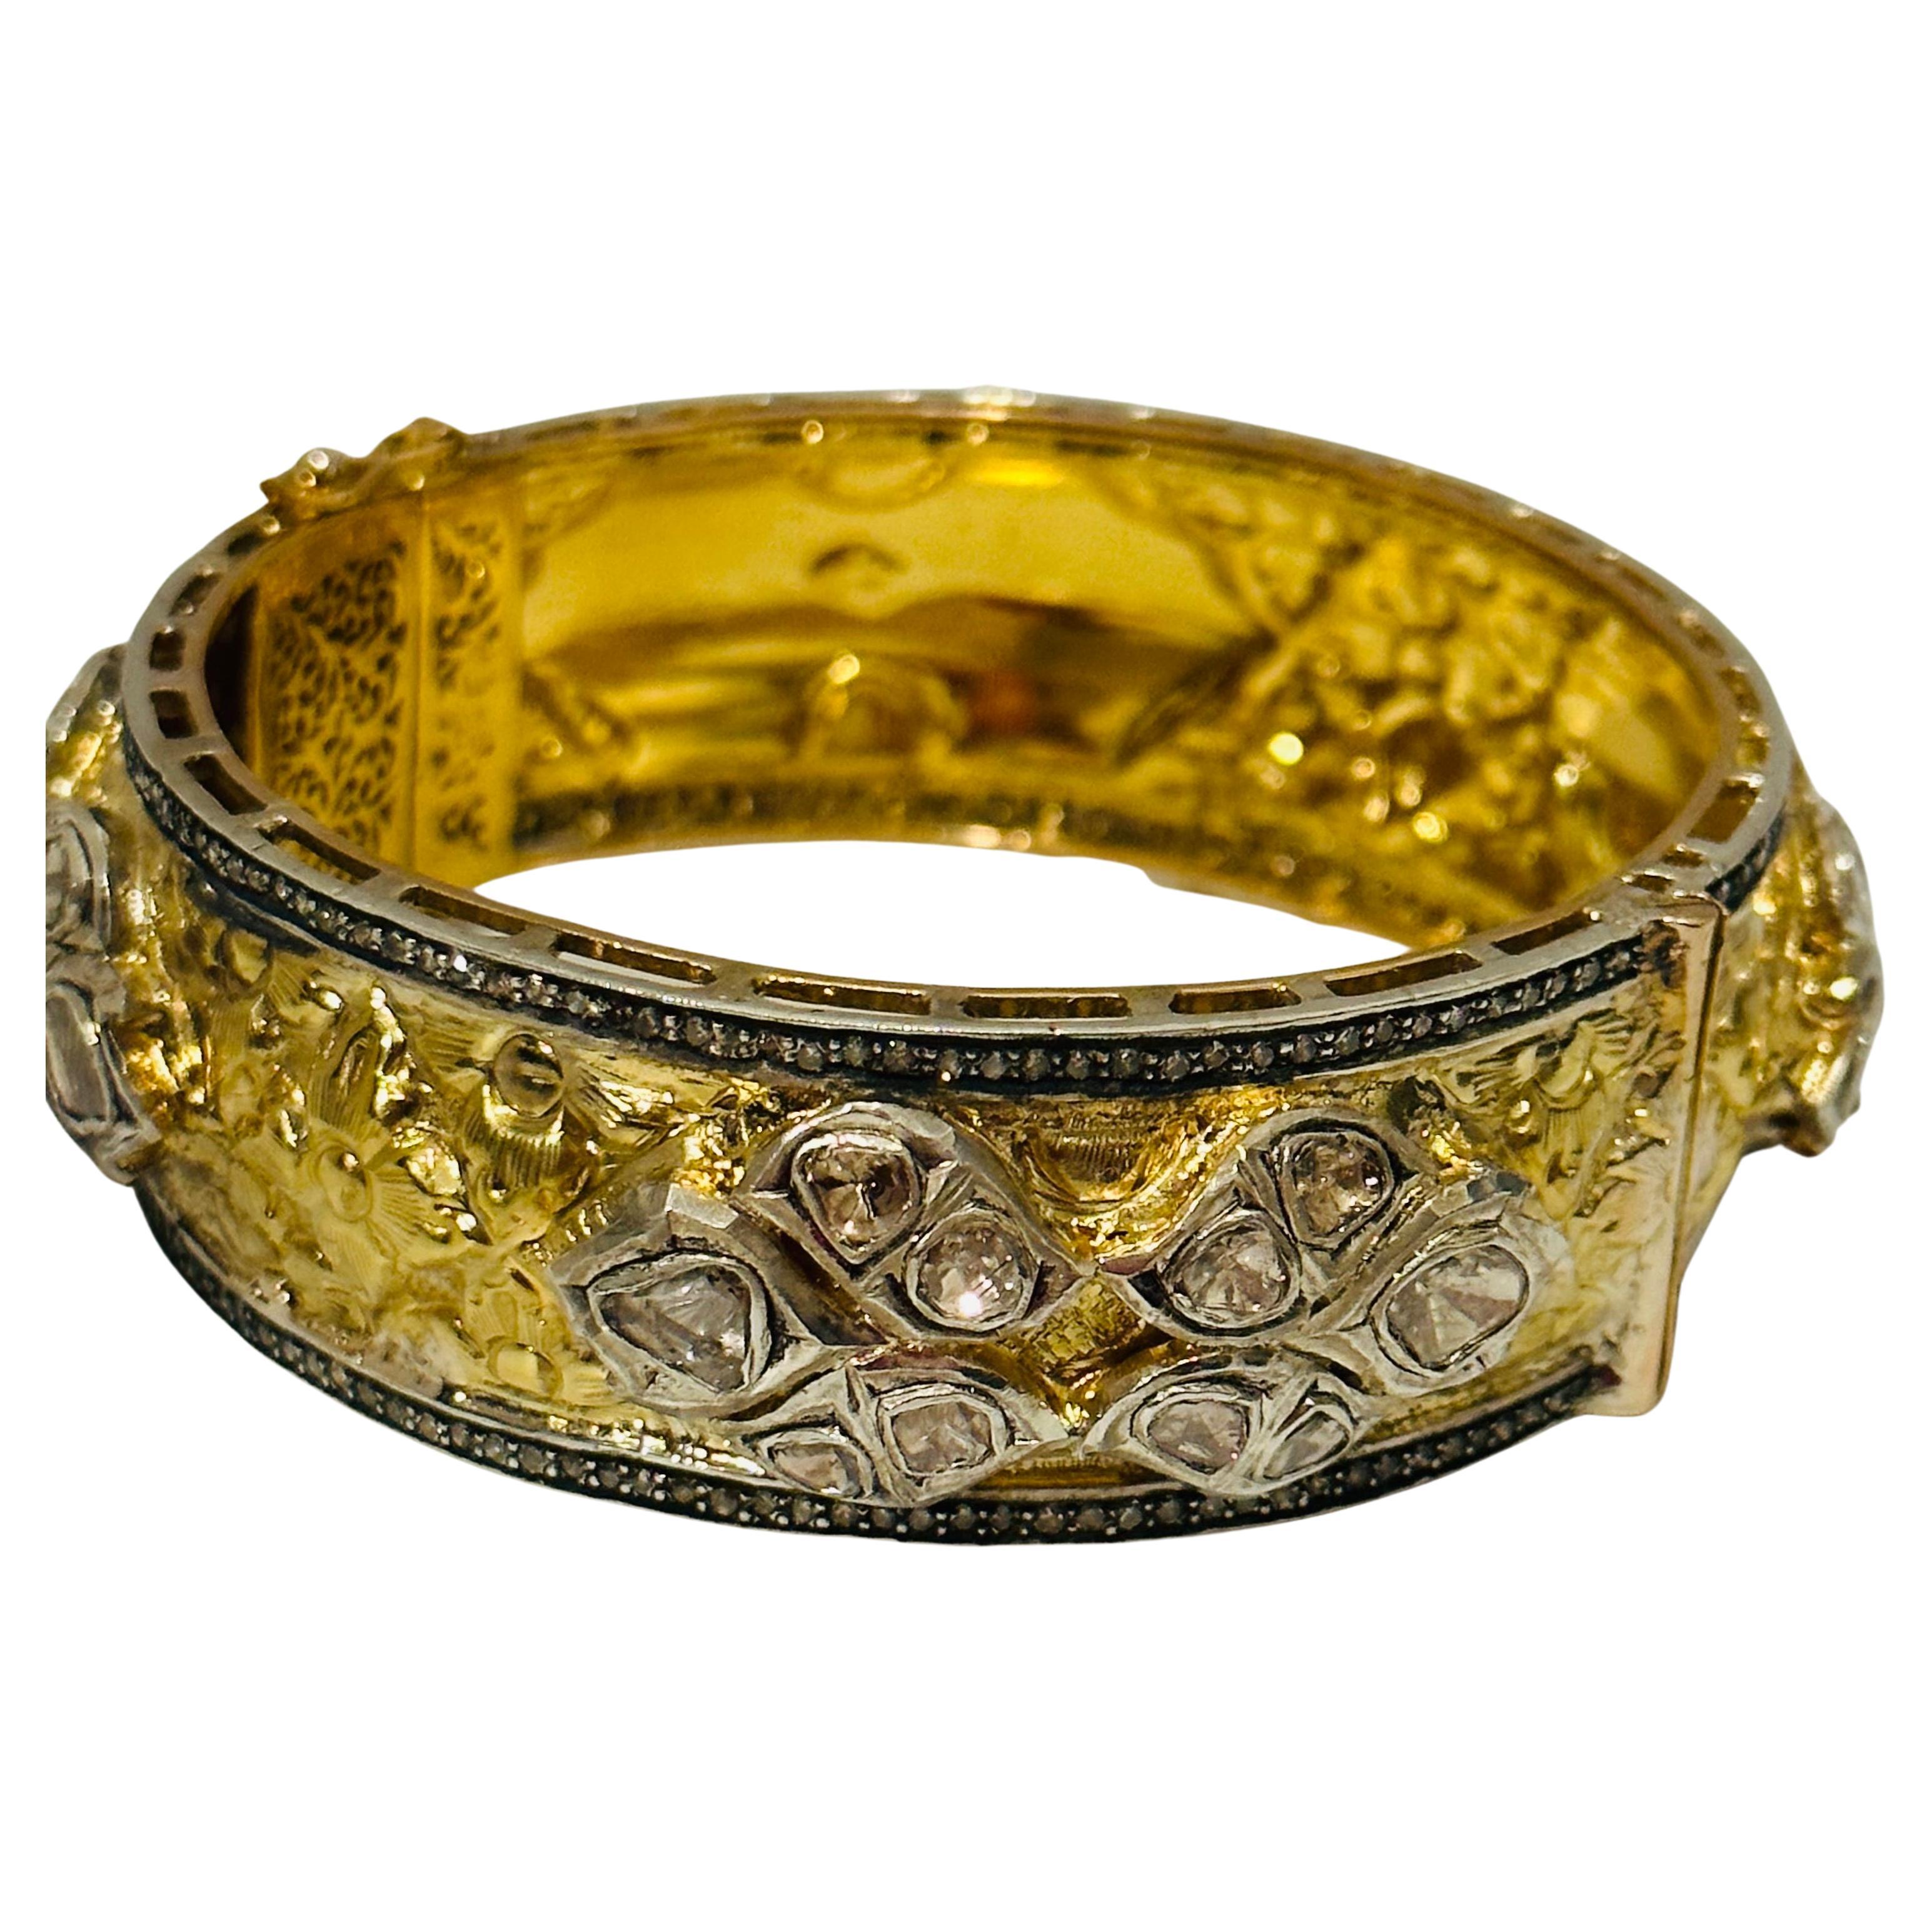 18 Karat Yellow gold & 925 Silver Polki Bangle, Solid Silver &  Gold  Diamond Bangle, Victorian Diamond Handmade Bracelets
It features a bangle style  crafted from an 18k Yellow gold and  Sterling Silver embedded with many  big  polki  diamonds